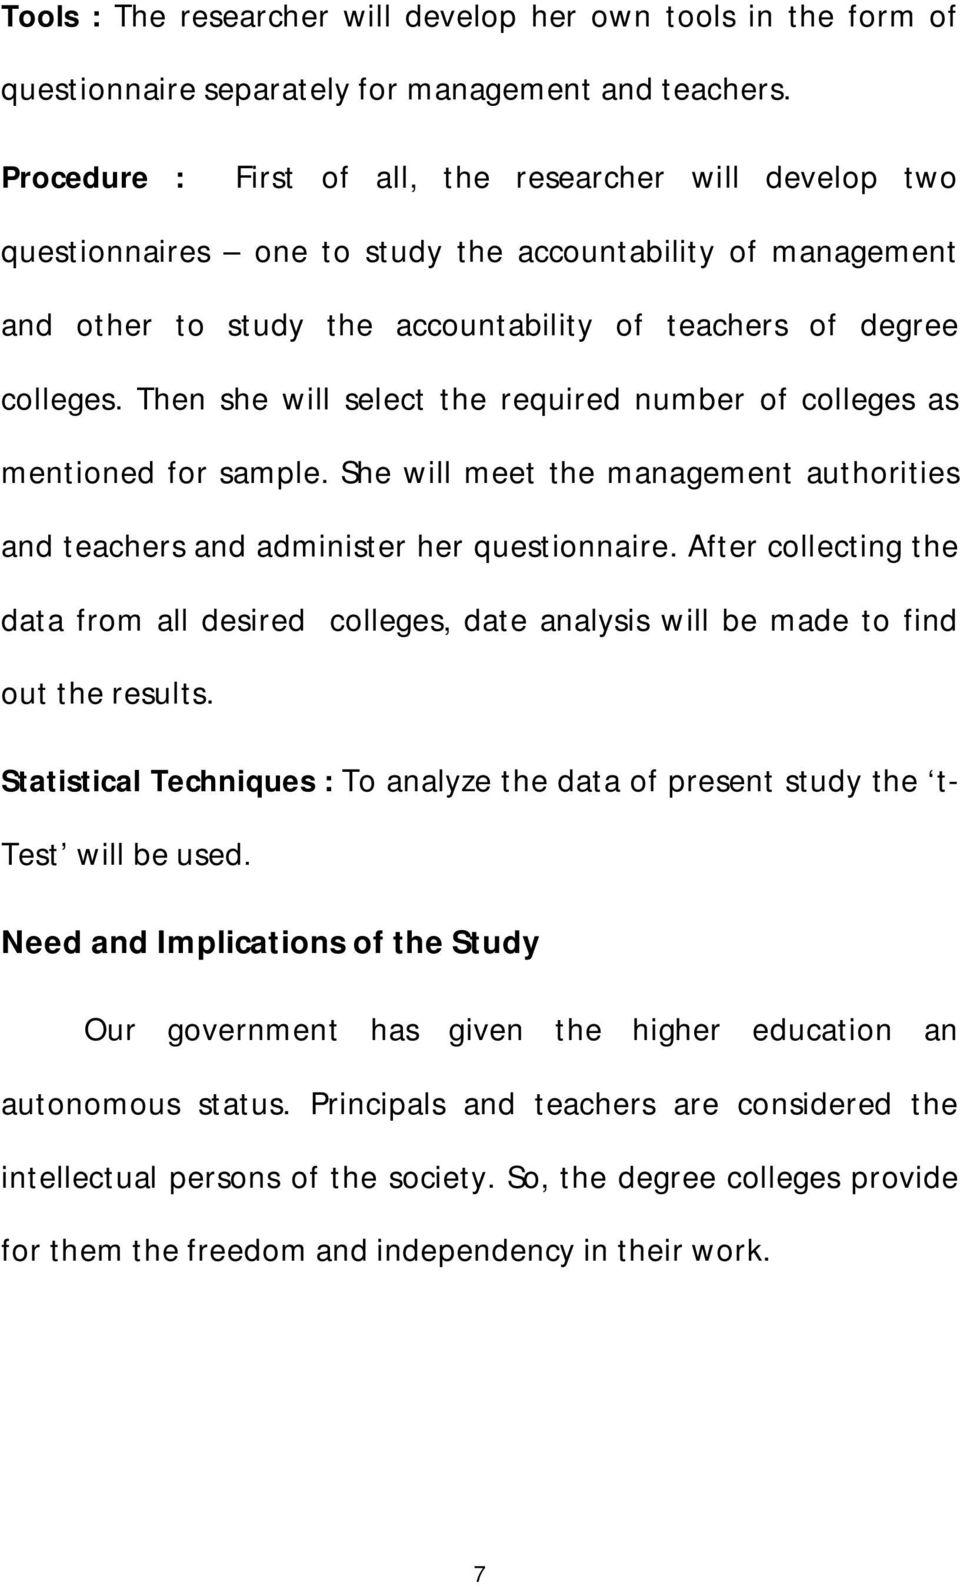 Then she will select the required number of colleges as mentioned for sample. She will meet the management authorities and teachers and administer her questionnaire.